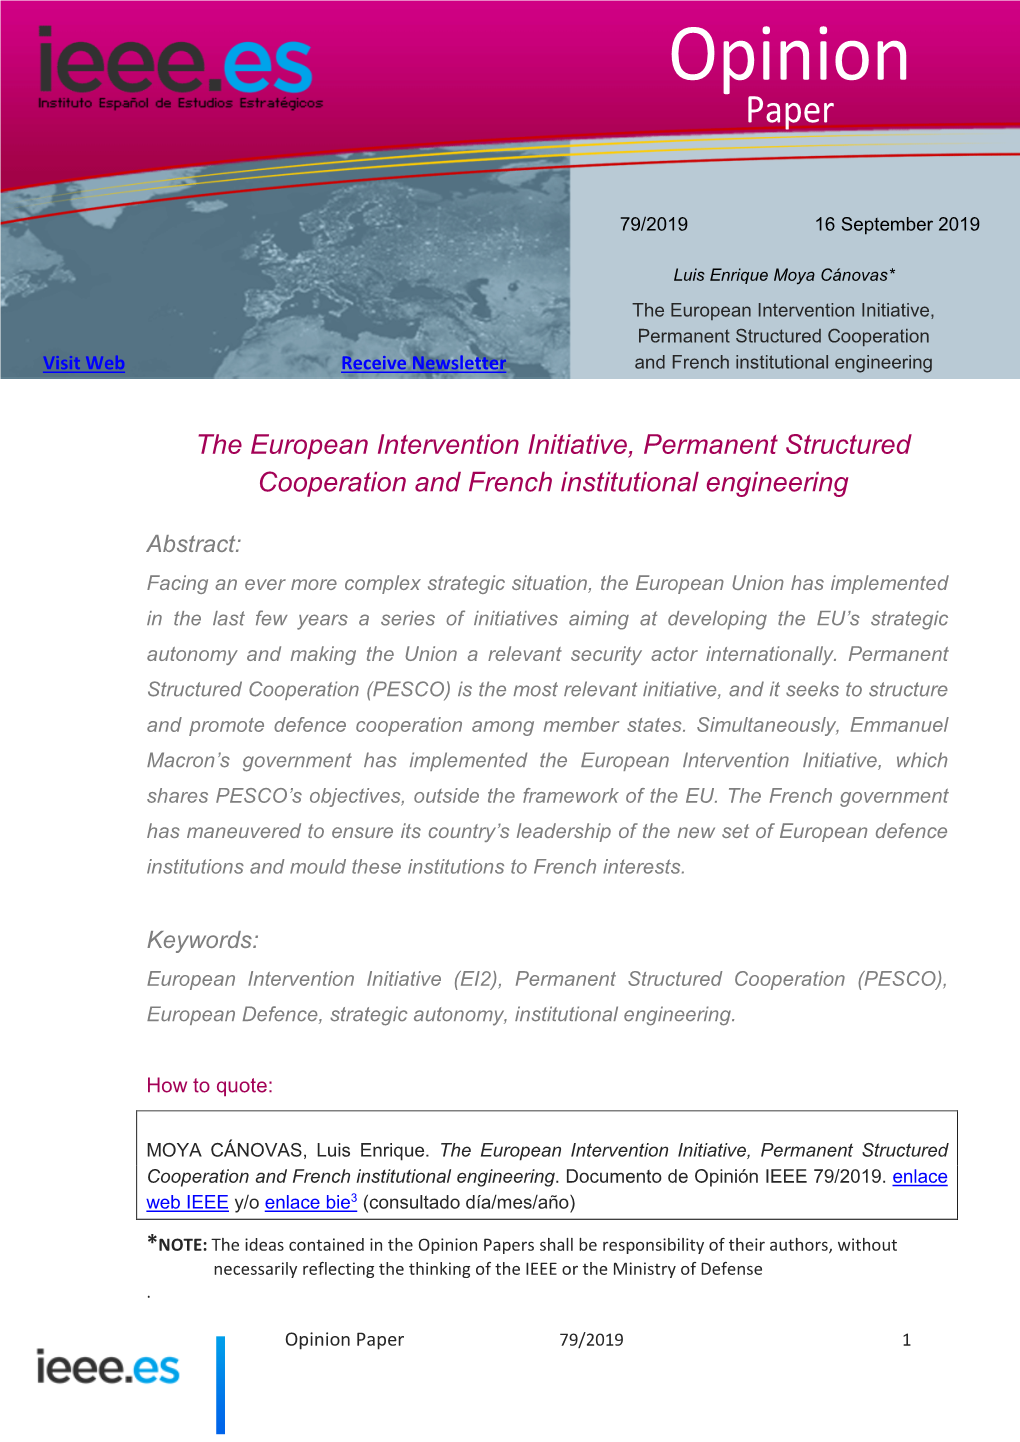 The European Intervention Initiative, Permanent Structured Cooperation and French Institutional Engineering